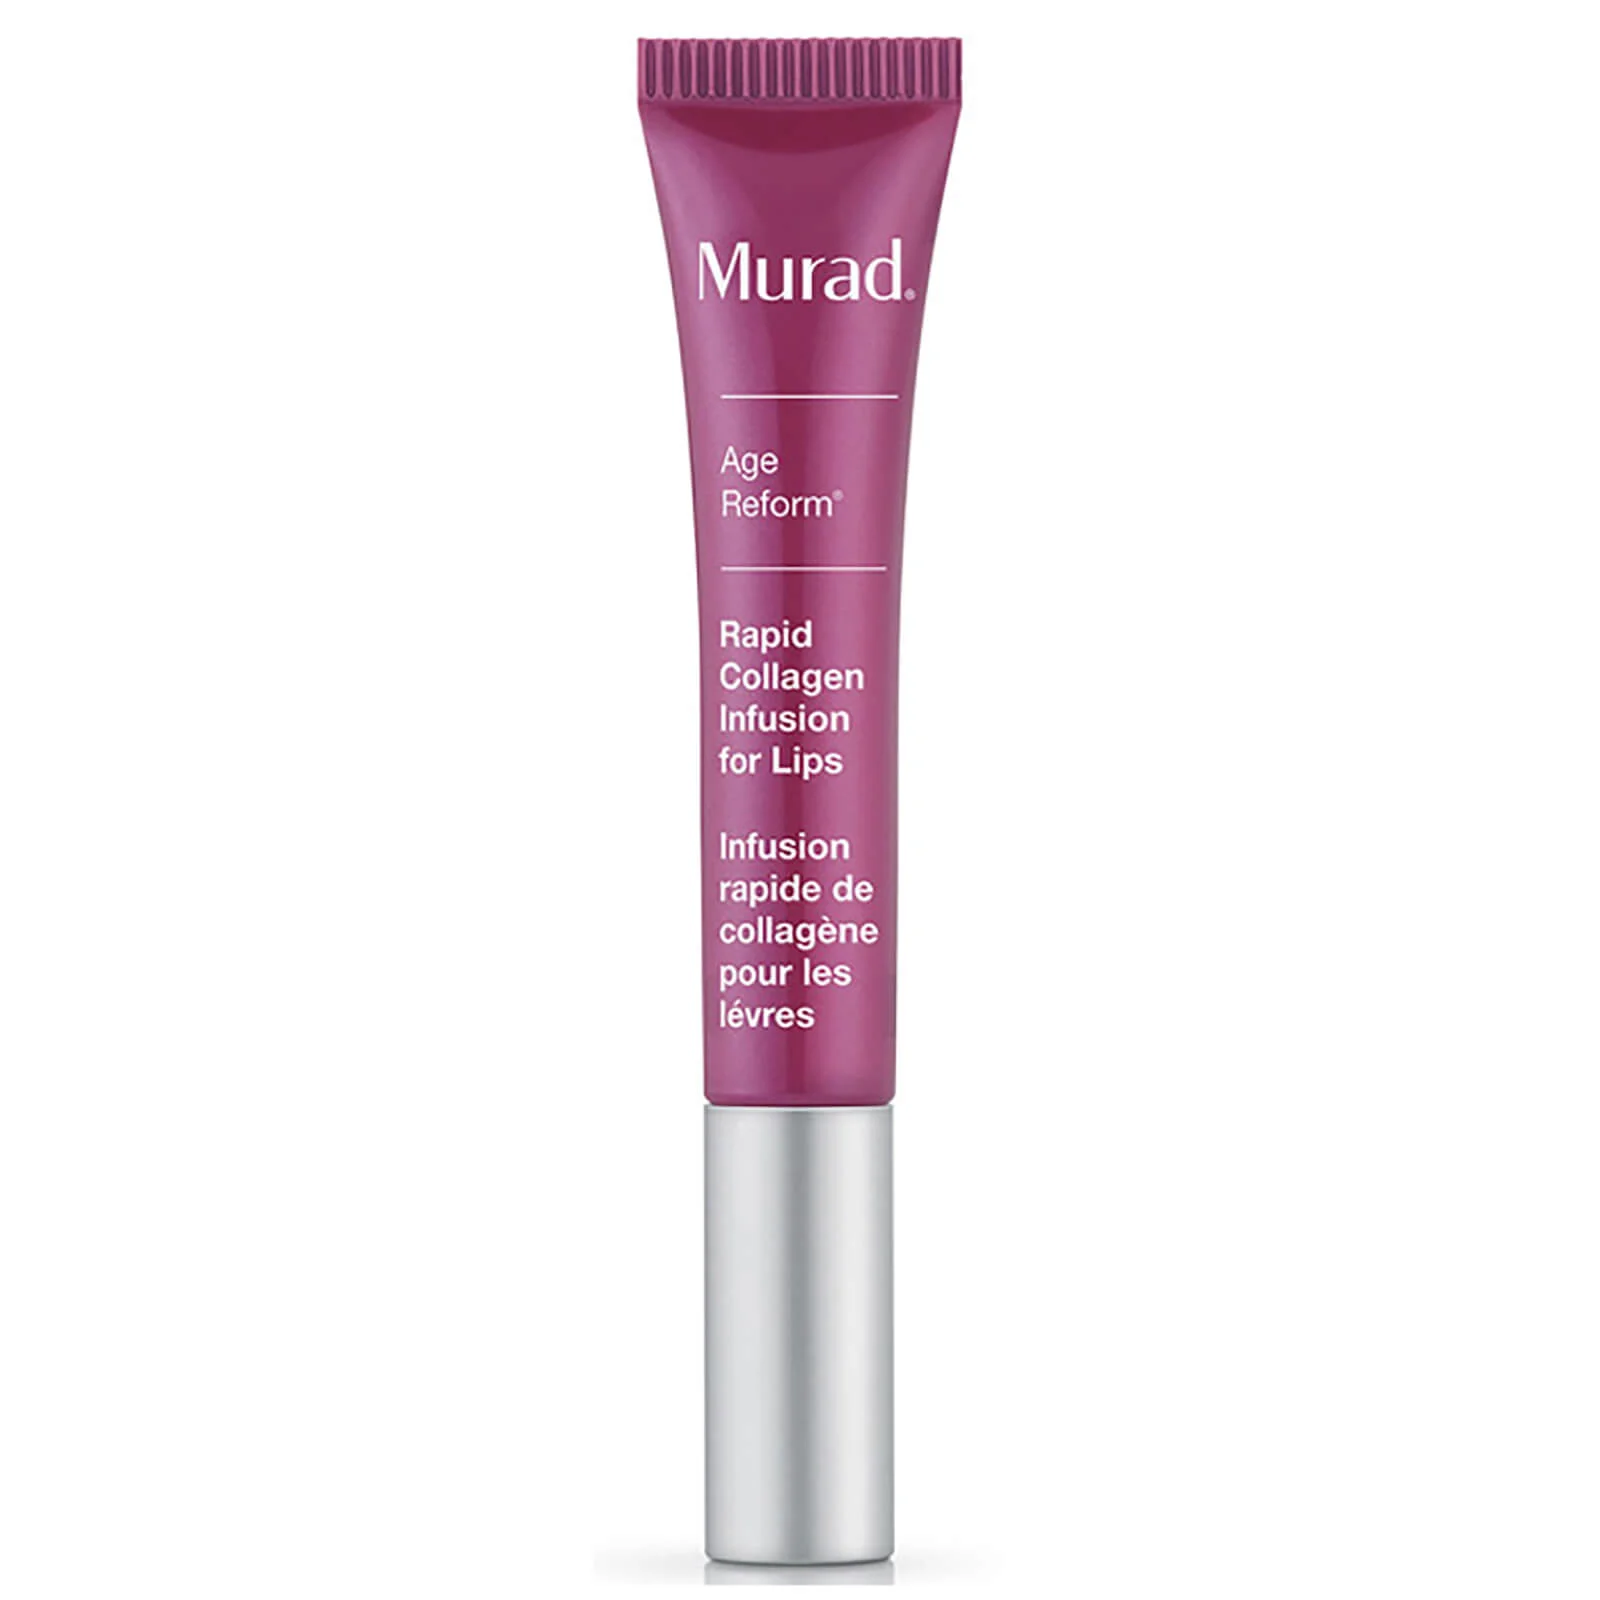 Murad Rapid Collagen Infusion for Lips 10ml Image 1